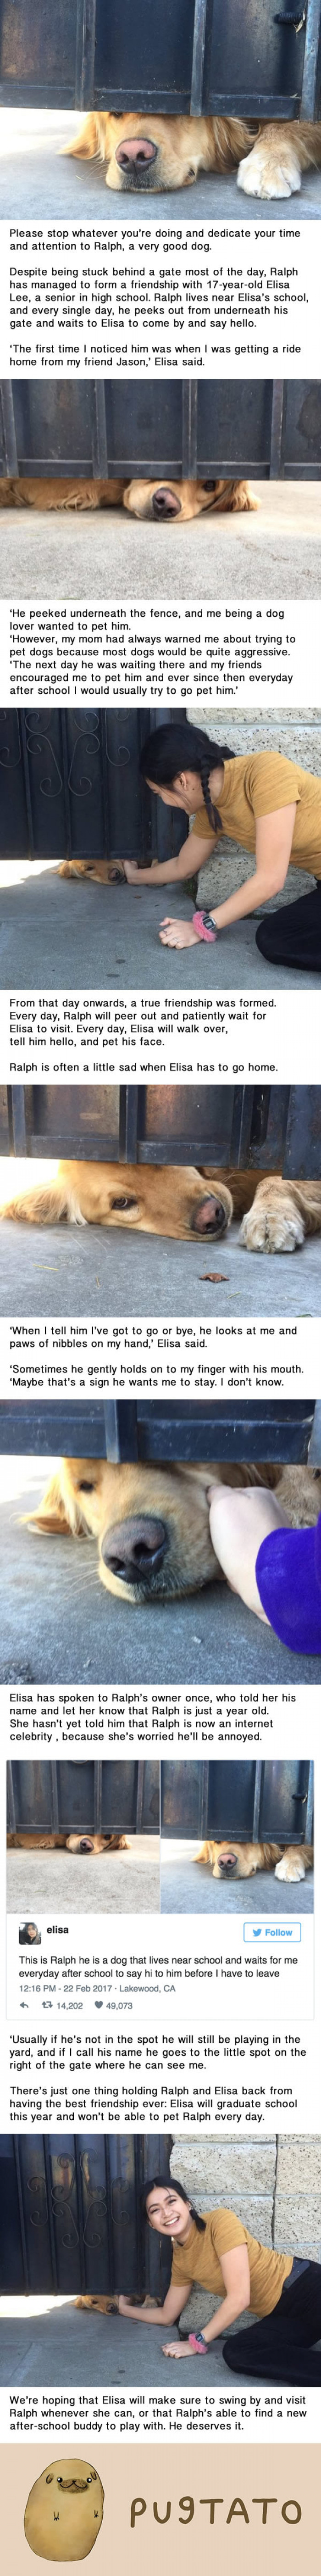 Every day Ralph the dog peeks out from under a gate to wait for his best friend to come home